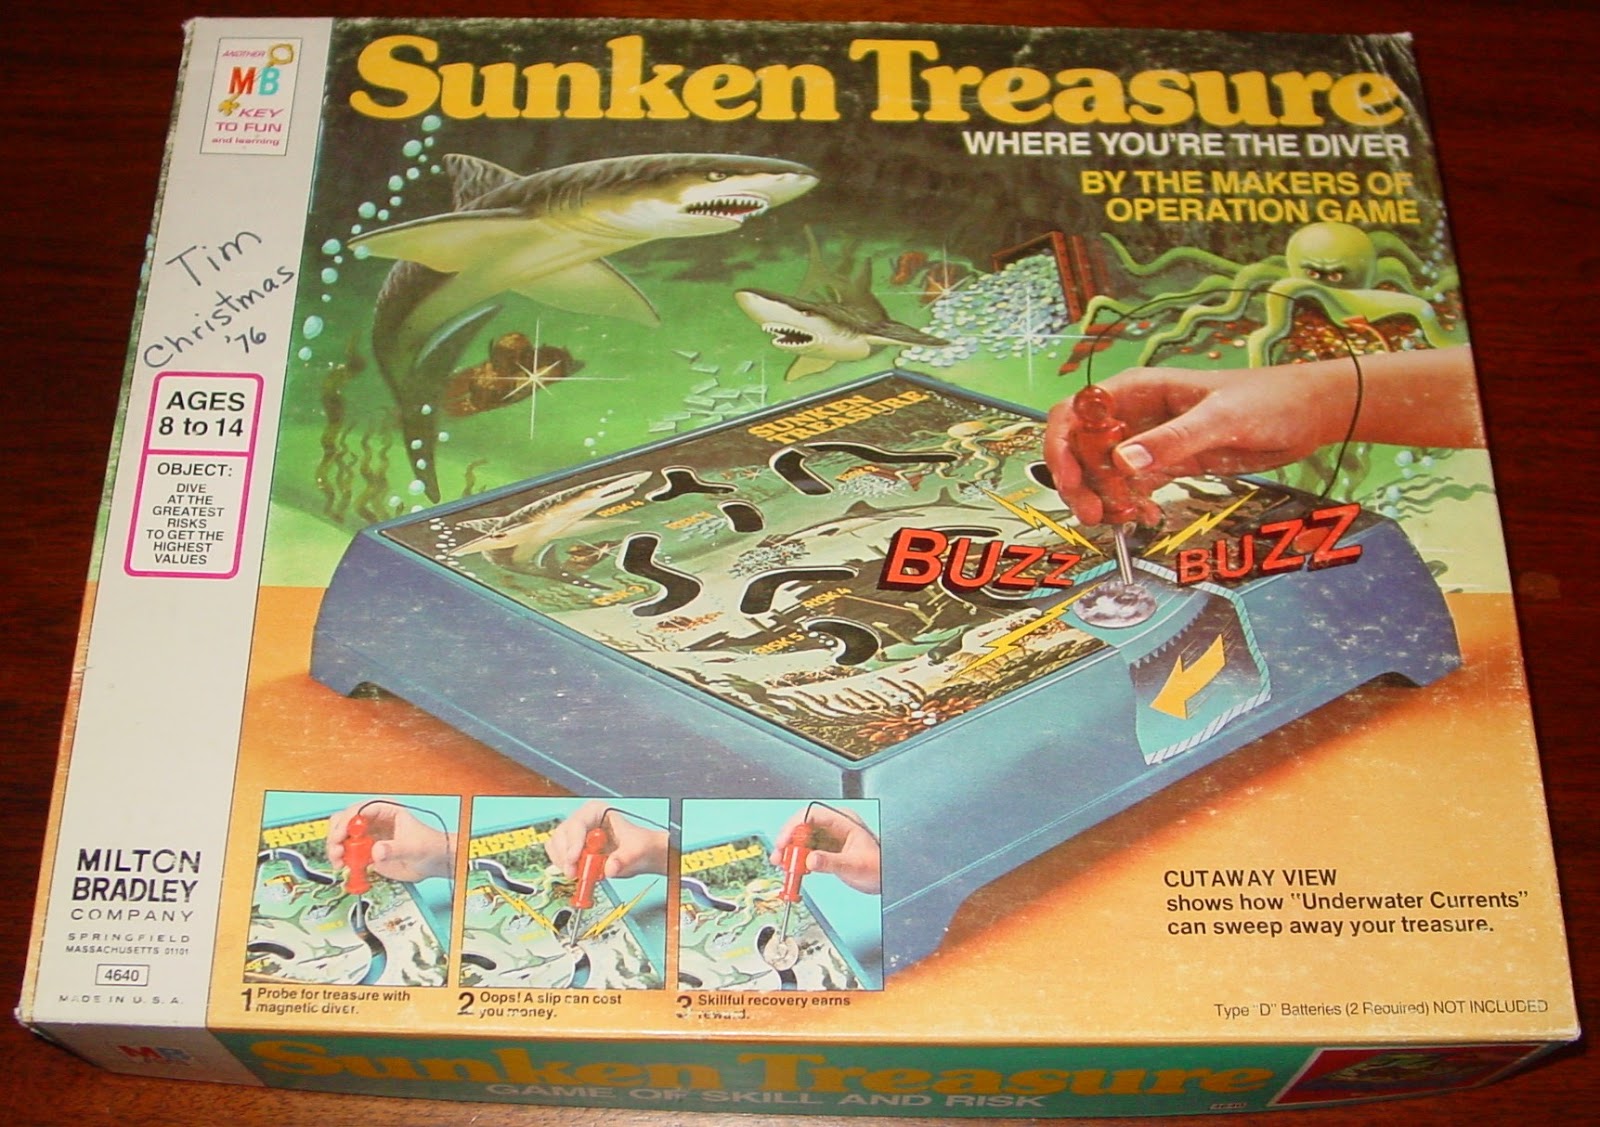 vintage toys - games - Sunken Treasure Key To Fun and long Where You'Re The Diver By The Makers Of Operation Game www Tim Christmas 76 Ages 8 to 14 Object Dive At The Greatest Risks To Get The Highest Values Su Buz Buzz Milton Bradley Cutaway View shows h